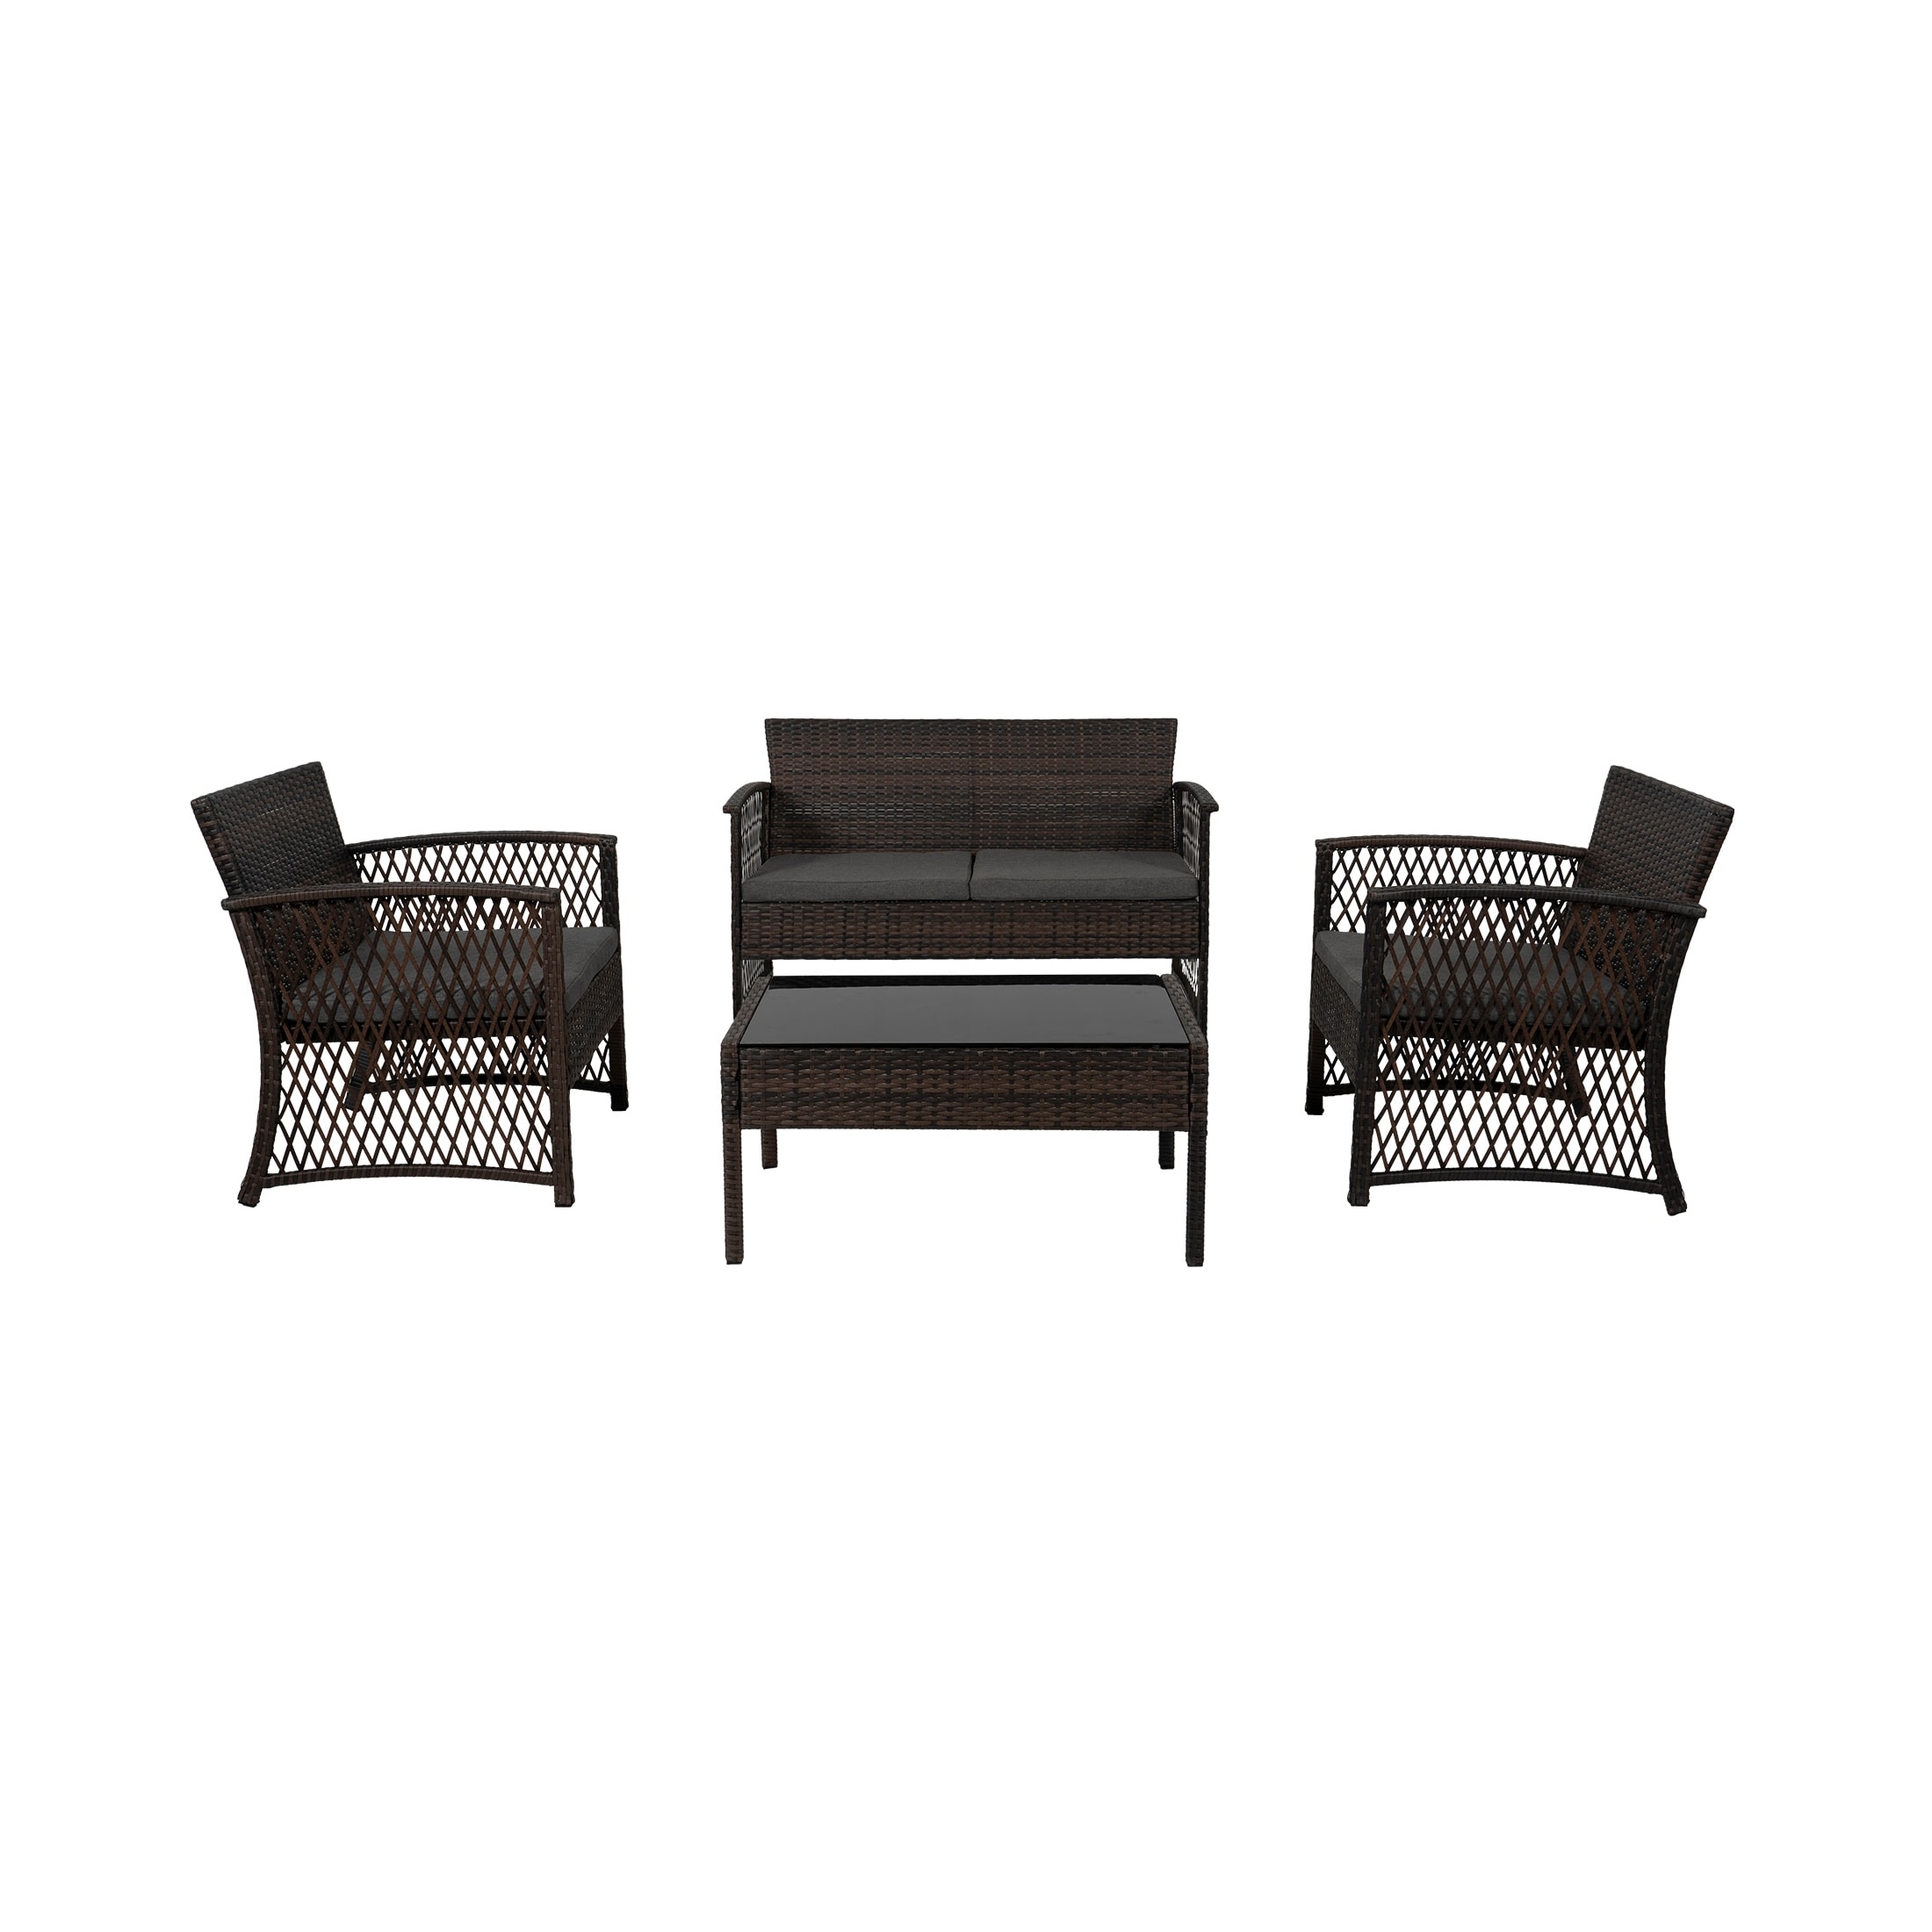 Madison Outdoor 4-piece Rattan Patio Furniture Chat Set